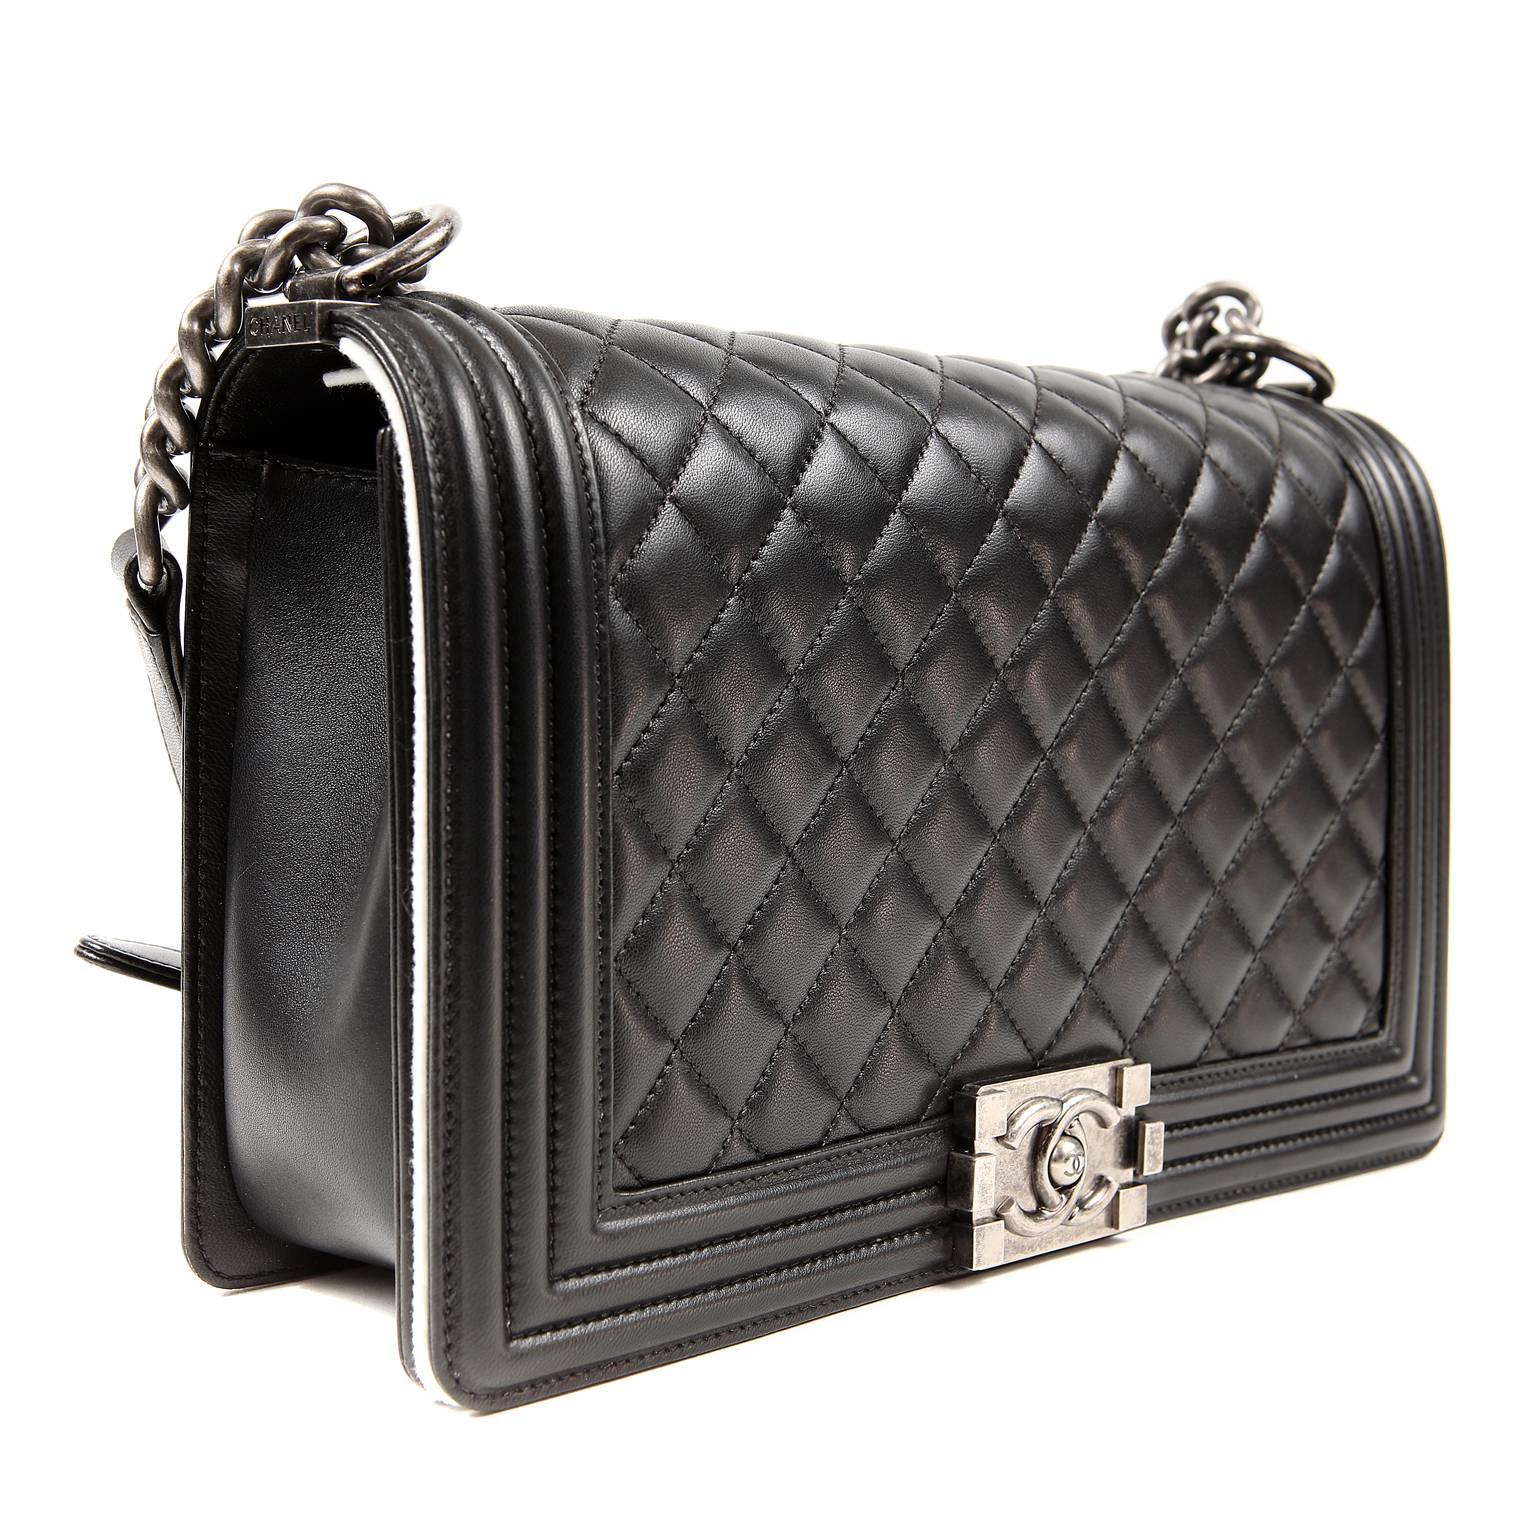 Chanel Black Lambskin  Boy Bag- Large In New Condition For Sale In Malibu, CA